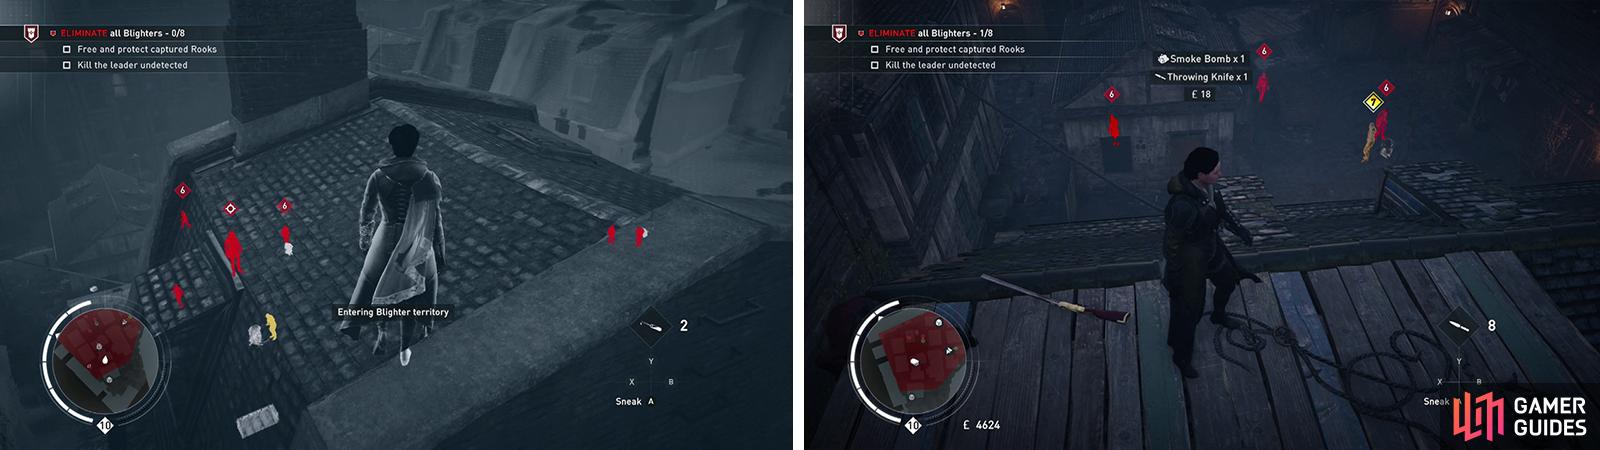 Tag the enemies using Eagle Vision from the rooftops (left). The Leader can be found in the courtyard with the Rook (right).